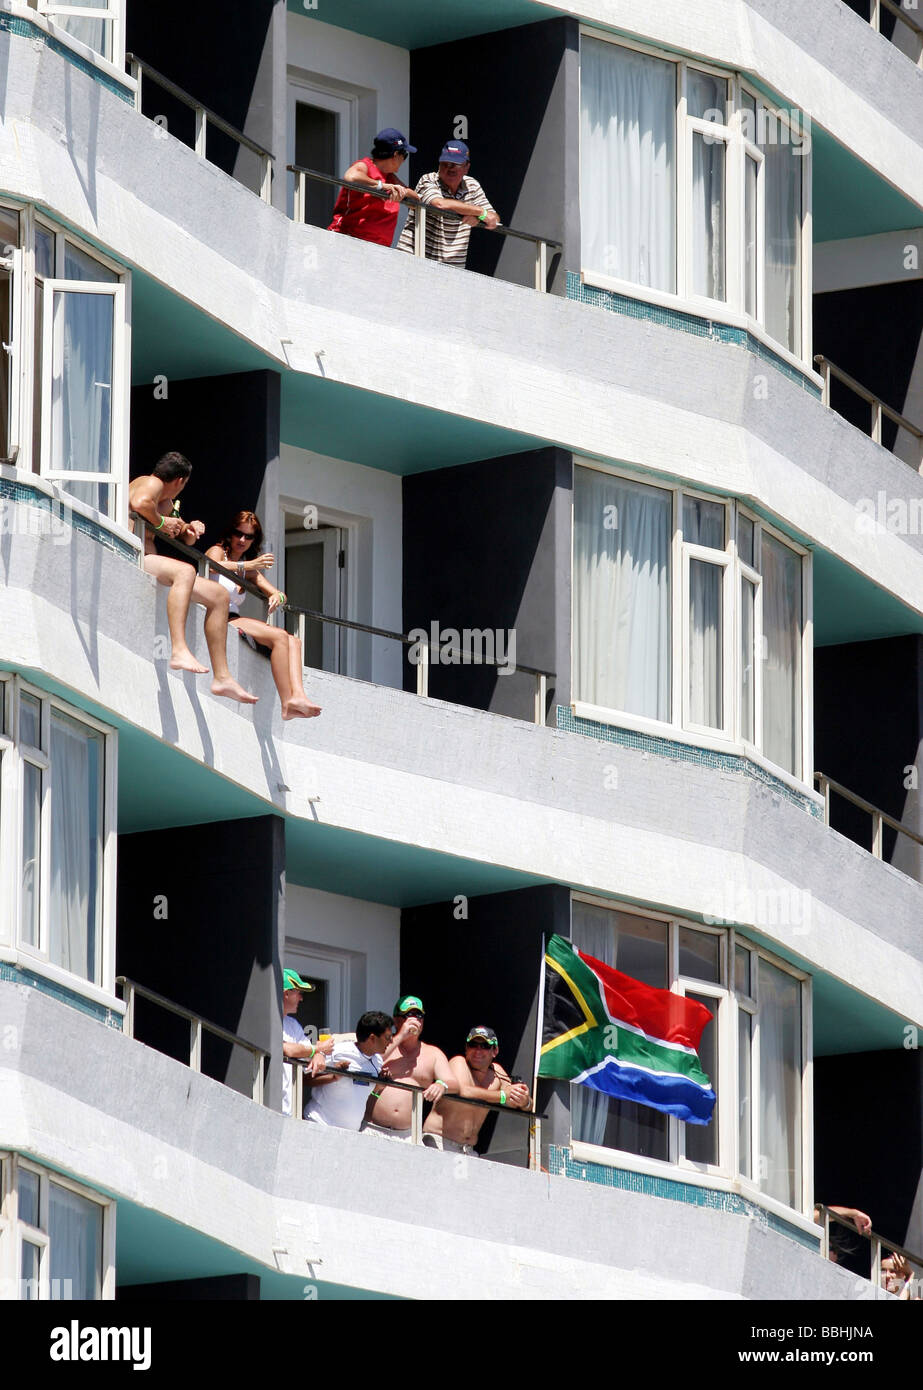 Spectators watch the A 1 Grand Prix race for the 2007 South Africa GP on 25 February 2007 in Durban Second place went to Great Stock Photo